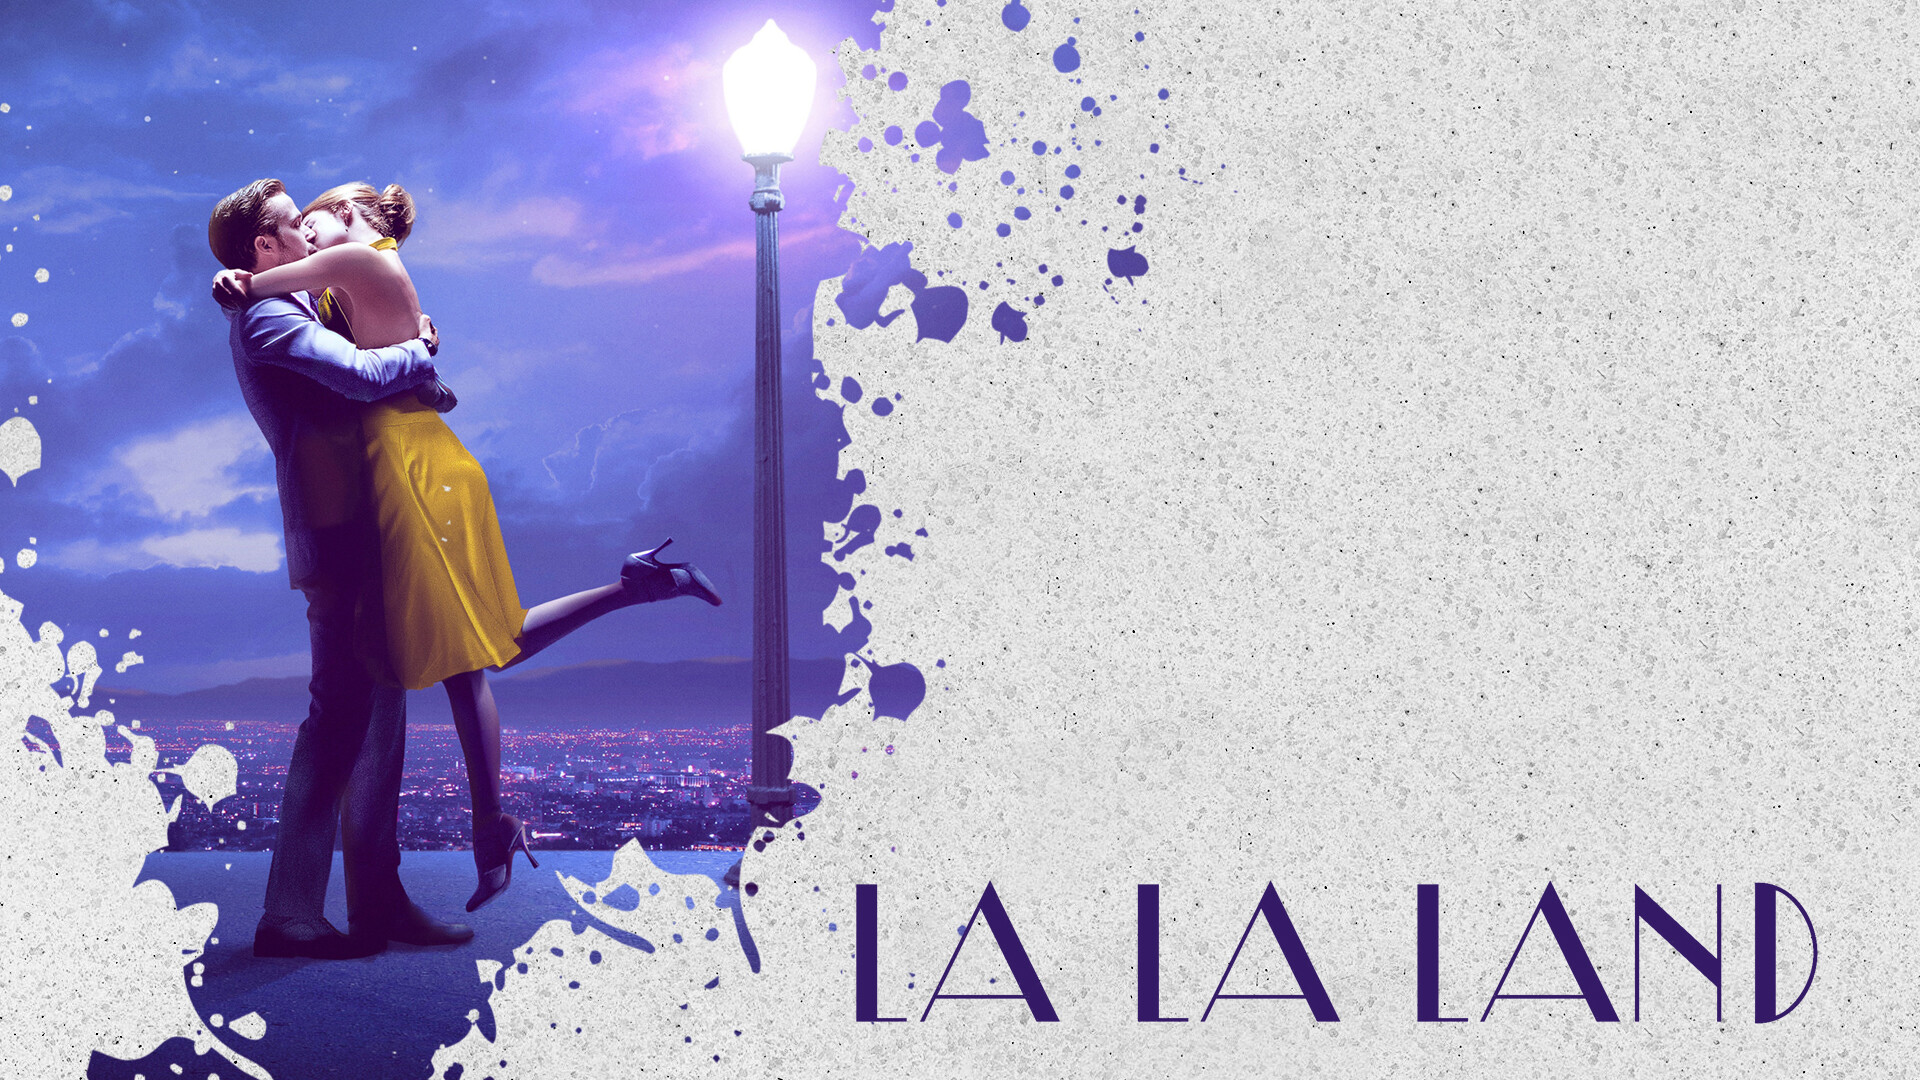 La La Land: Director Damien Chazelle's movie is an unapologetic musical that hearkens back to Hollywood's glory days of song and dance, Poster. 1920x1080 Full HD Wallpaper.